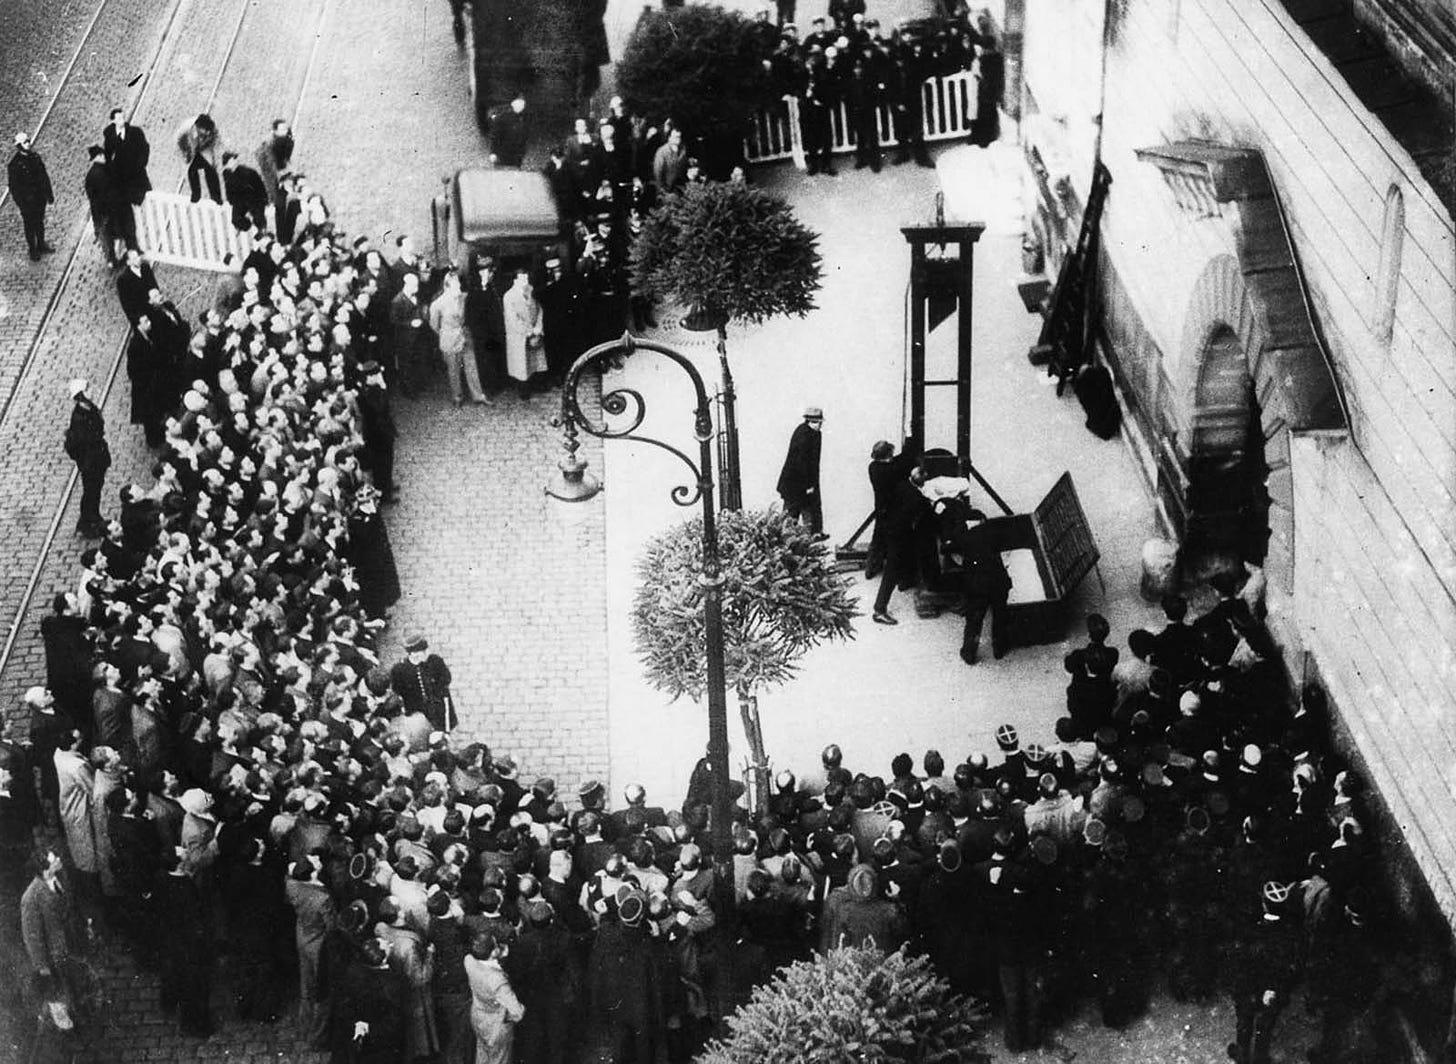 Weidmann is placed in the guillotine seconds before the blade falls.